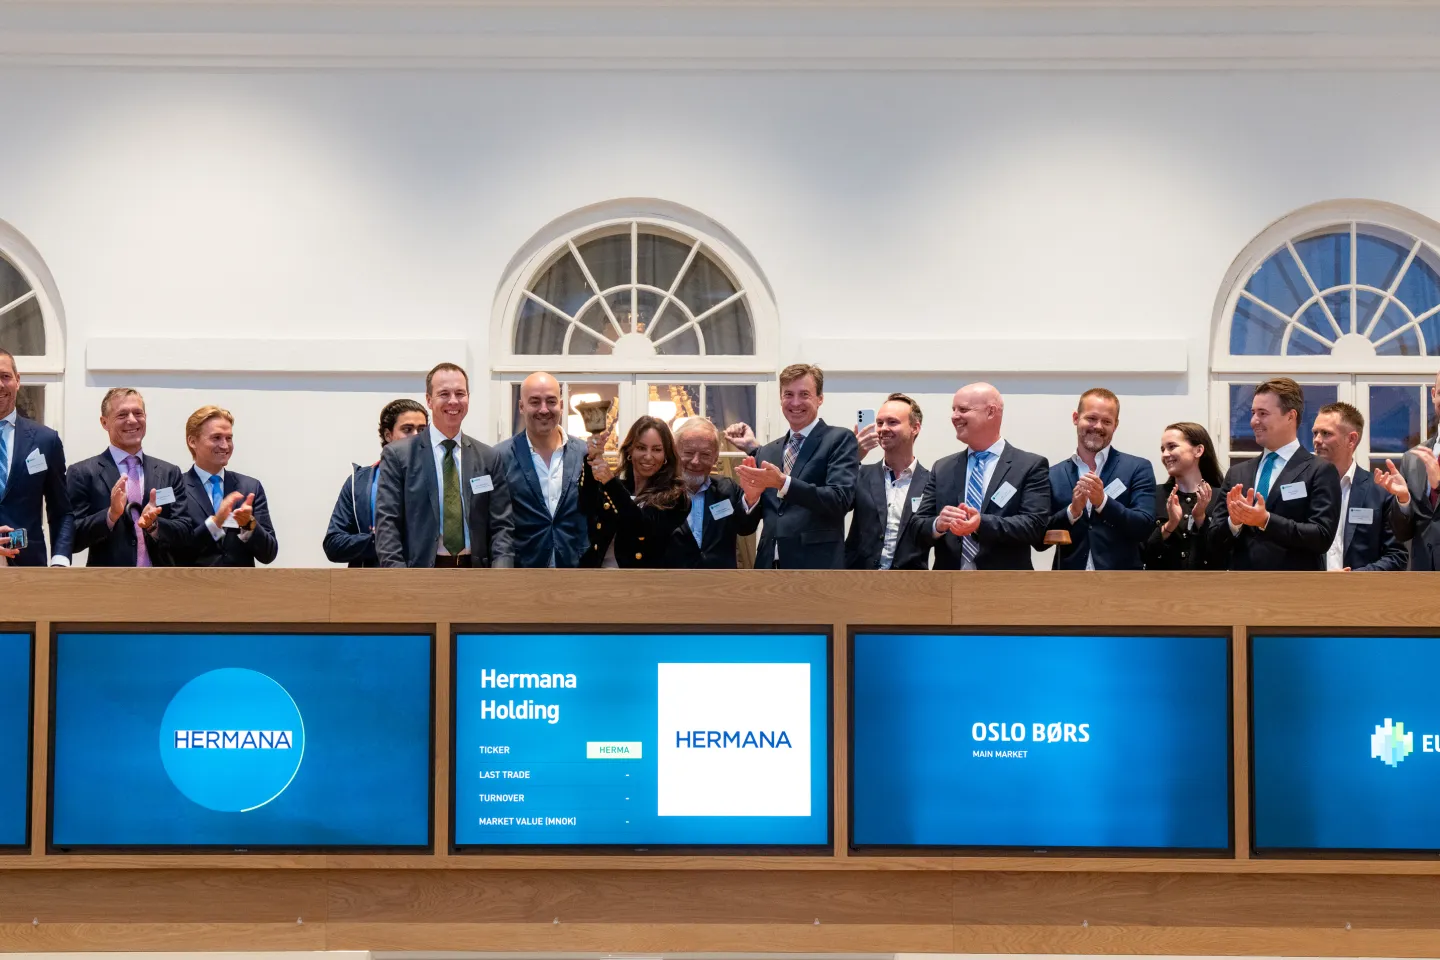 Ginny Pettersen, investor, rang the bell this morning to celebrate the listing of Hermana Holding and the first day of trading on Euronext Oslo Børs. To her left you see Erik Sneve, Chairman, and Stein Bjørnstad, CEO. The company was welcomed by Øivind Amundsen, CEO, and Eirik Høiby Ausland, Head of Listing, at Euronext Oslo Børs. (Photo: Thomas Brun | NTB)